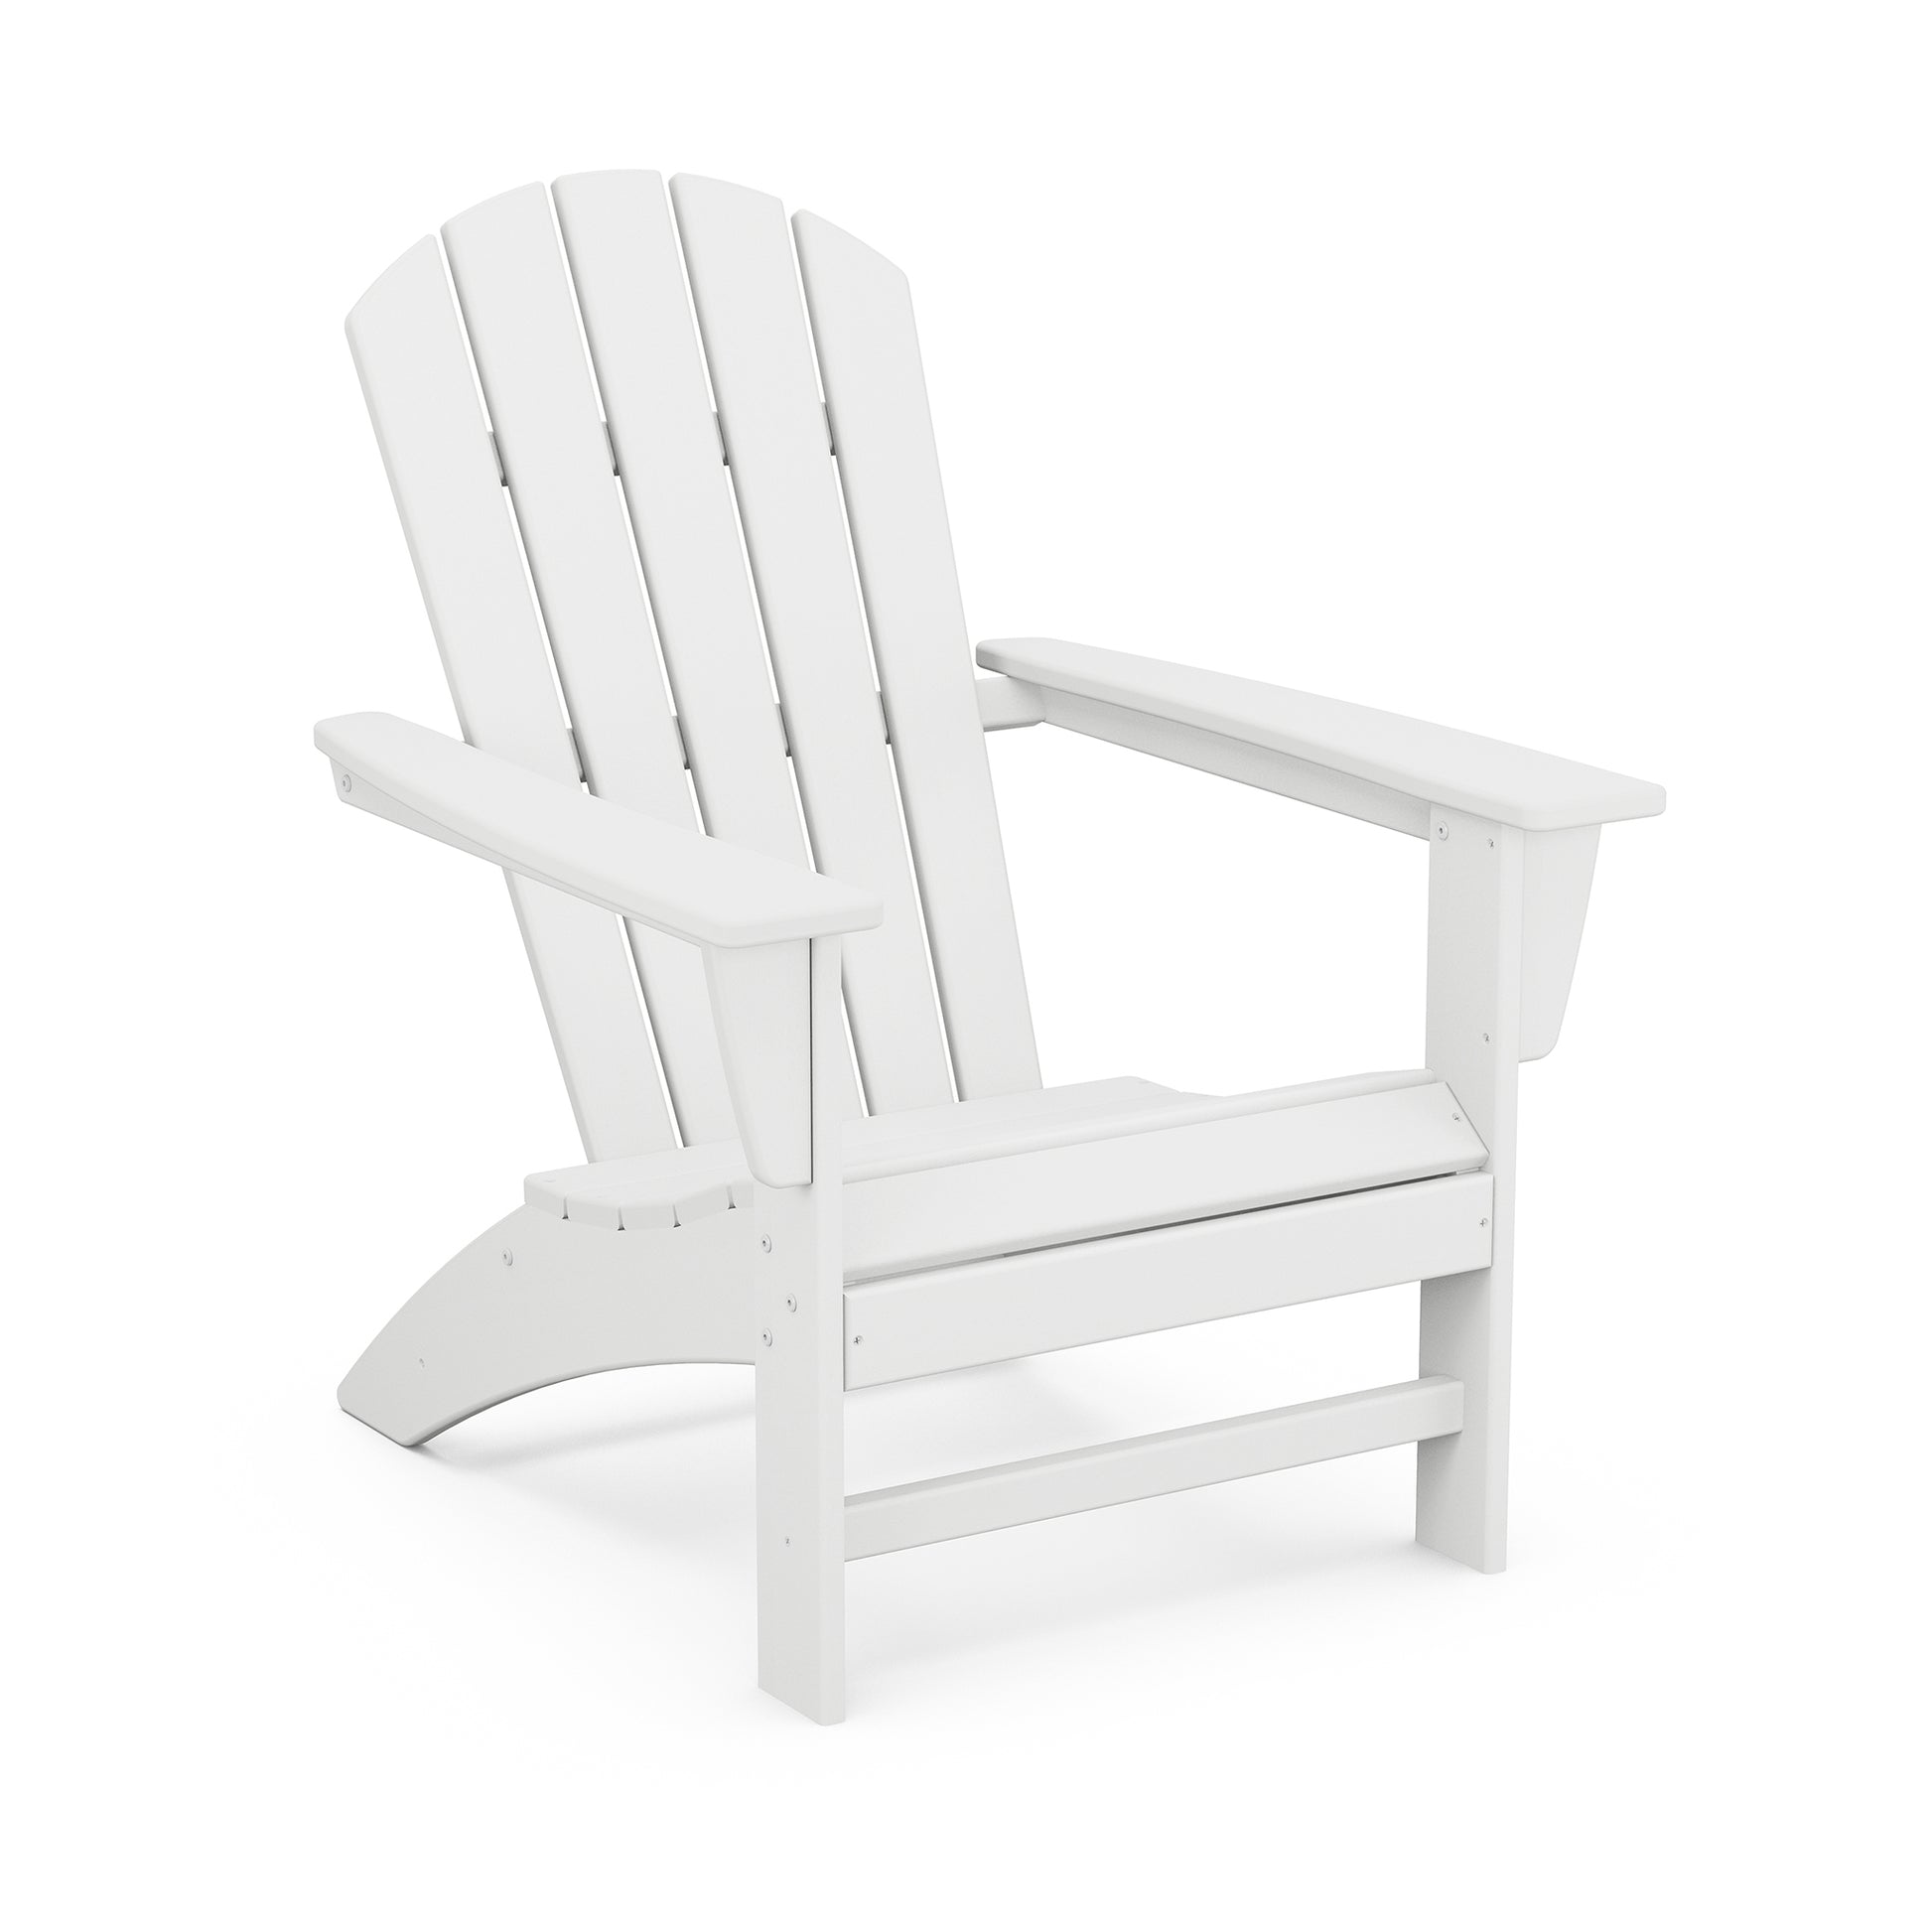 White POLYWOOD Nautical Adirondack chair, featuring a high back and wide armrests, isolated against a white background.